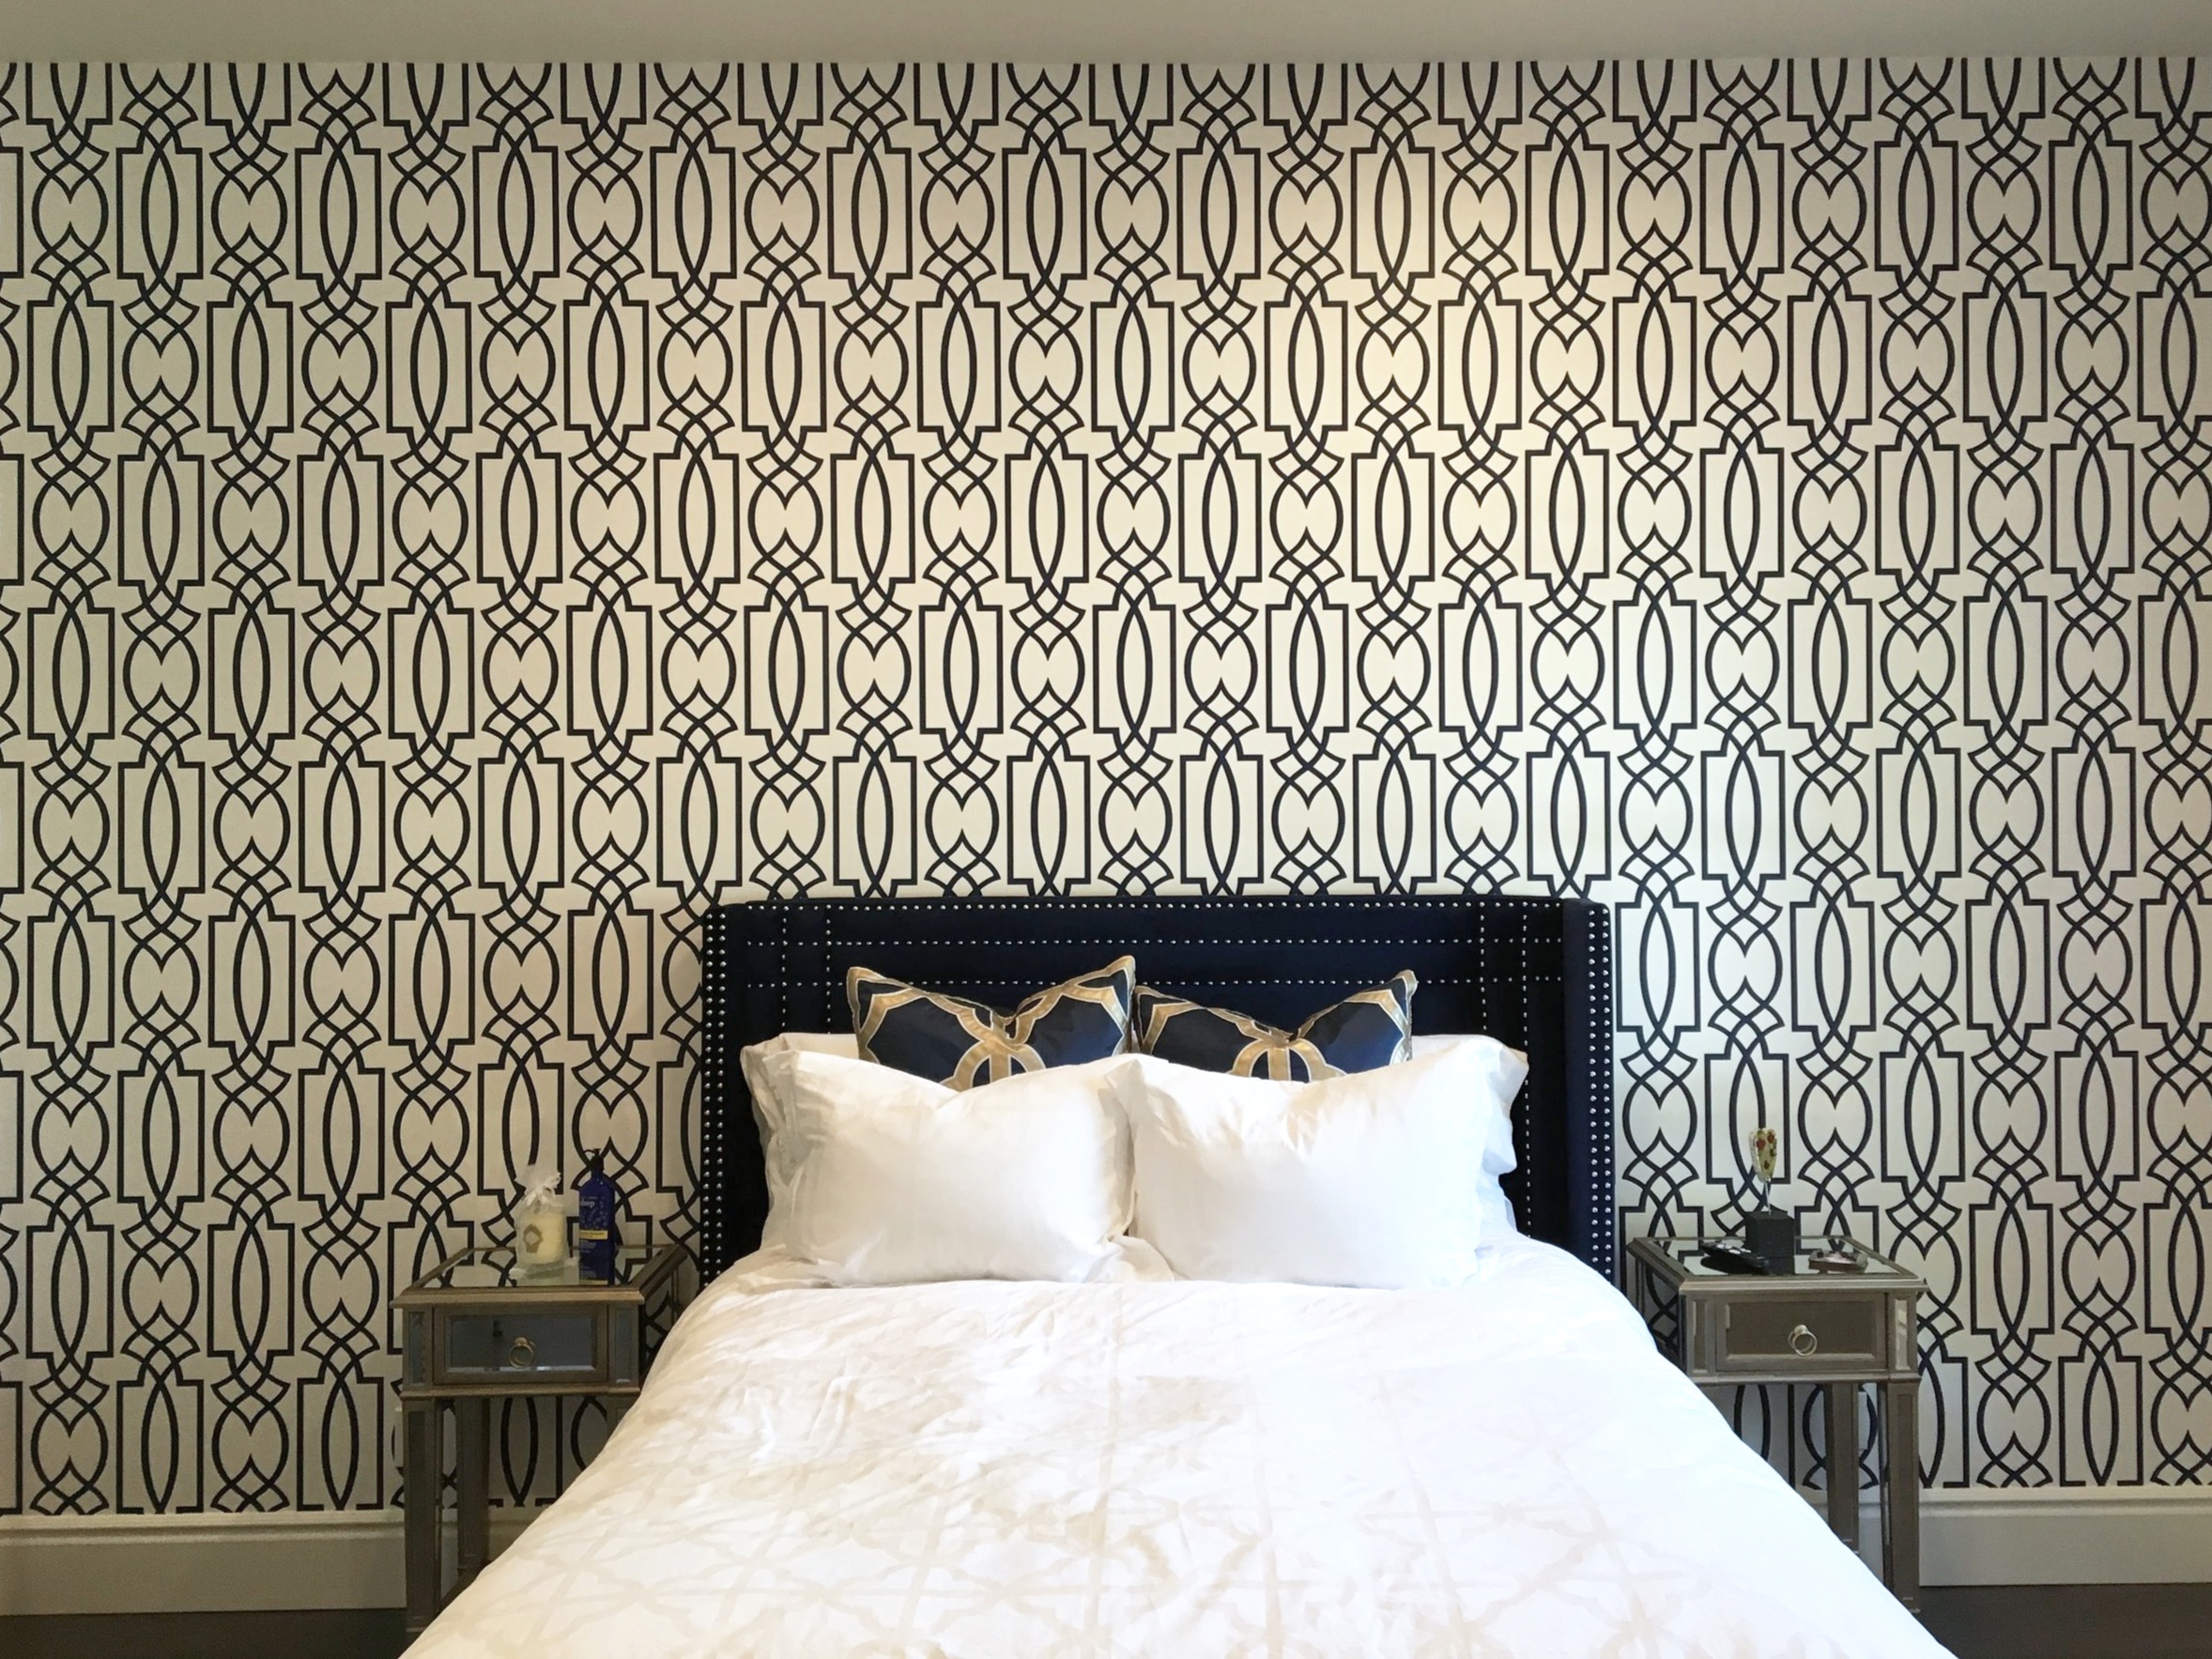 Wallpaper that wows Even a little bit of whimsy makes a bold statement   The San Diego UnionTribune